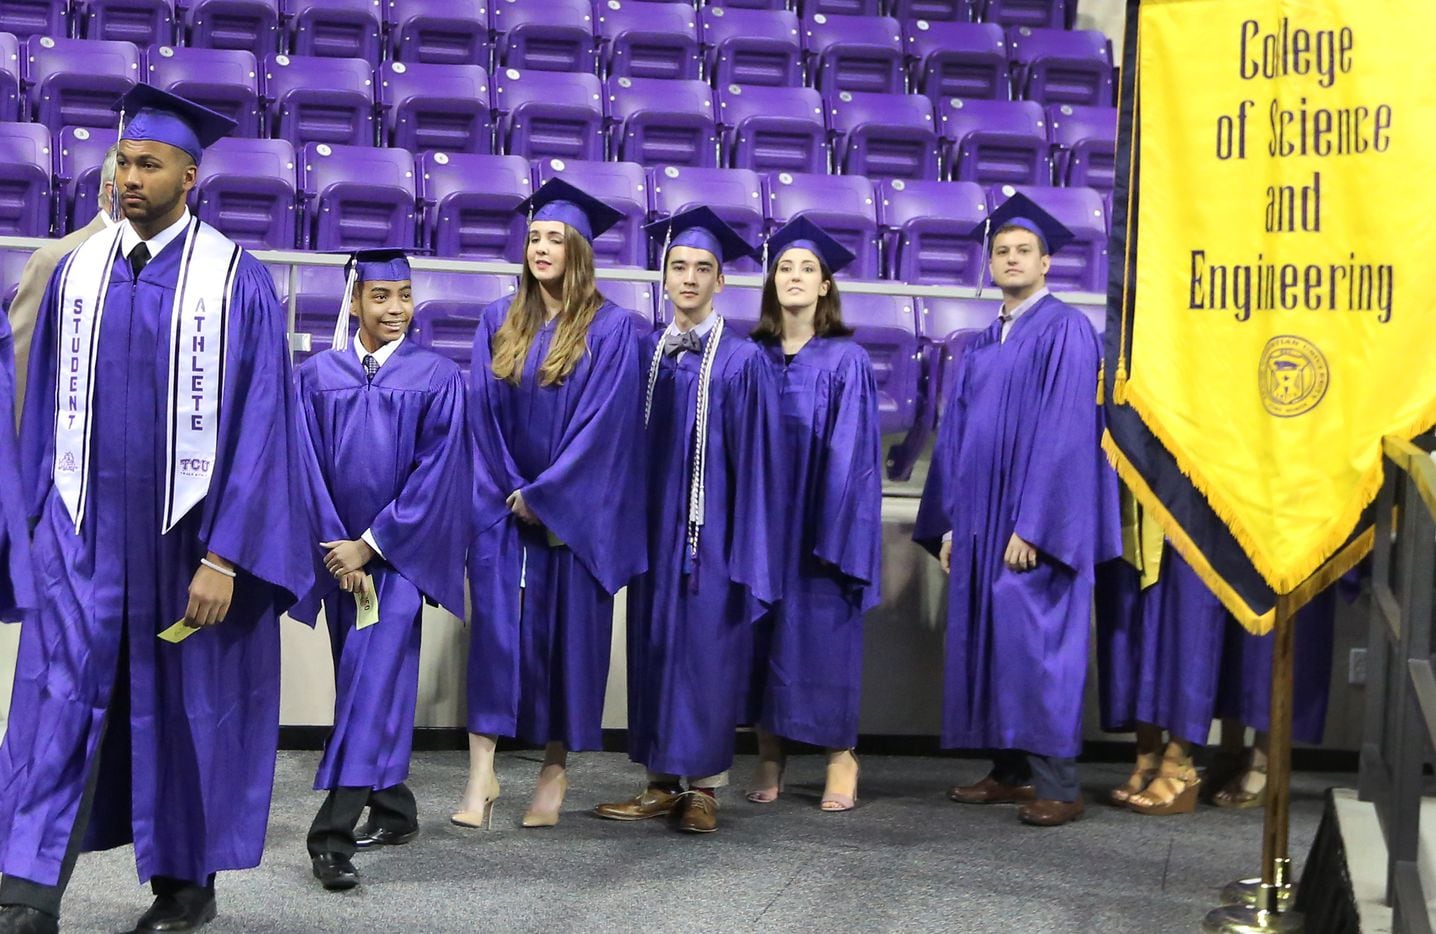 14-year-old Carson Huey-You, second from left, walks into the arena with fellow students as...